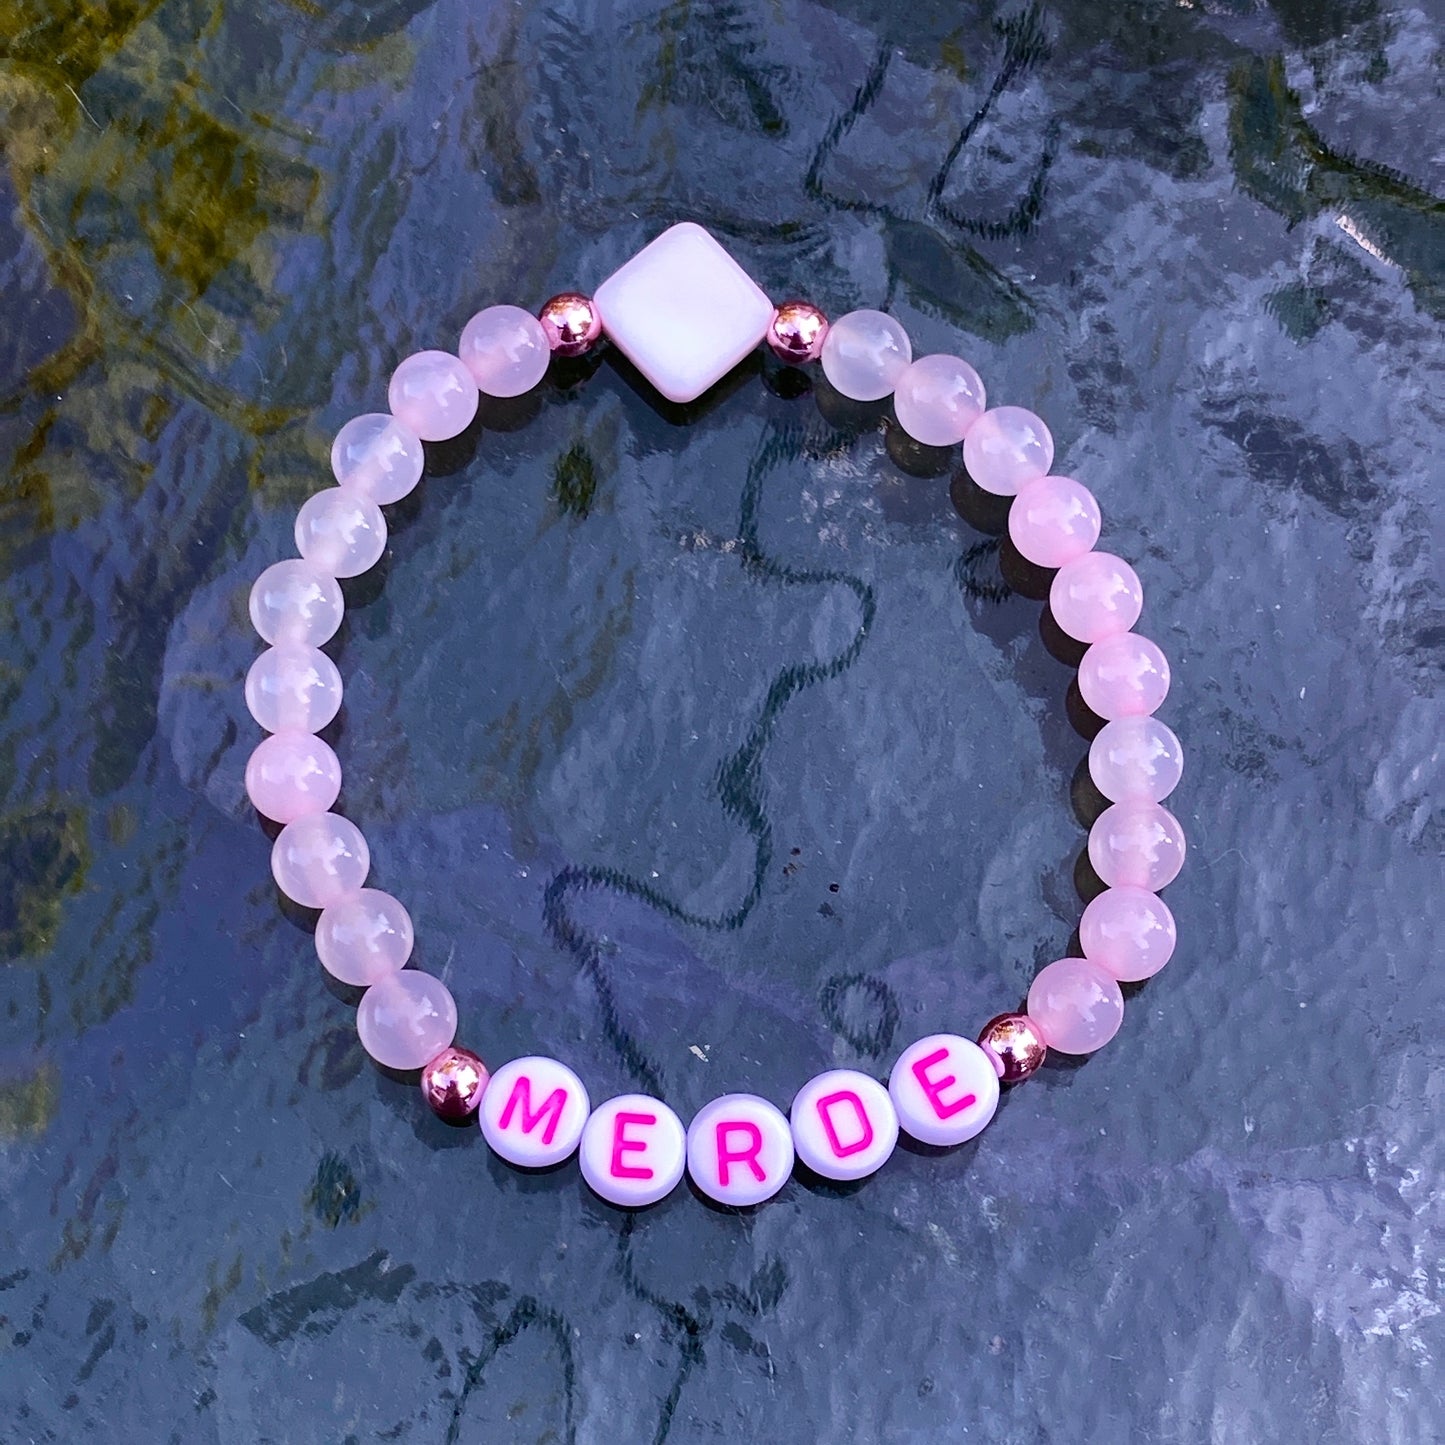 Women’s “merde” curse bracelet pink agate, rose hematite, and mother of pearl